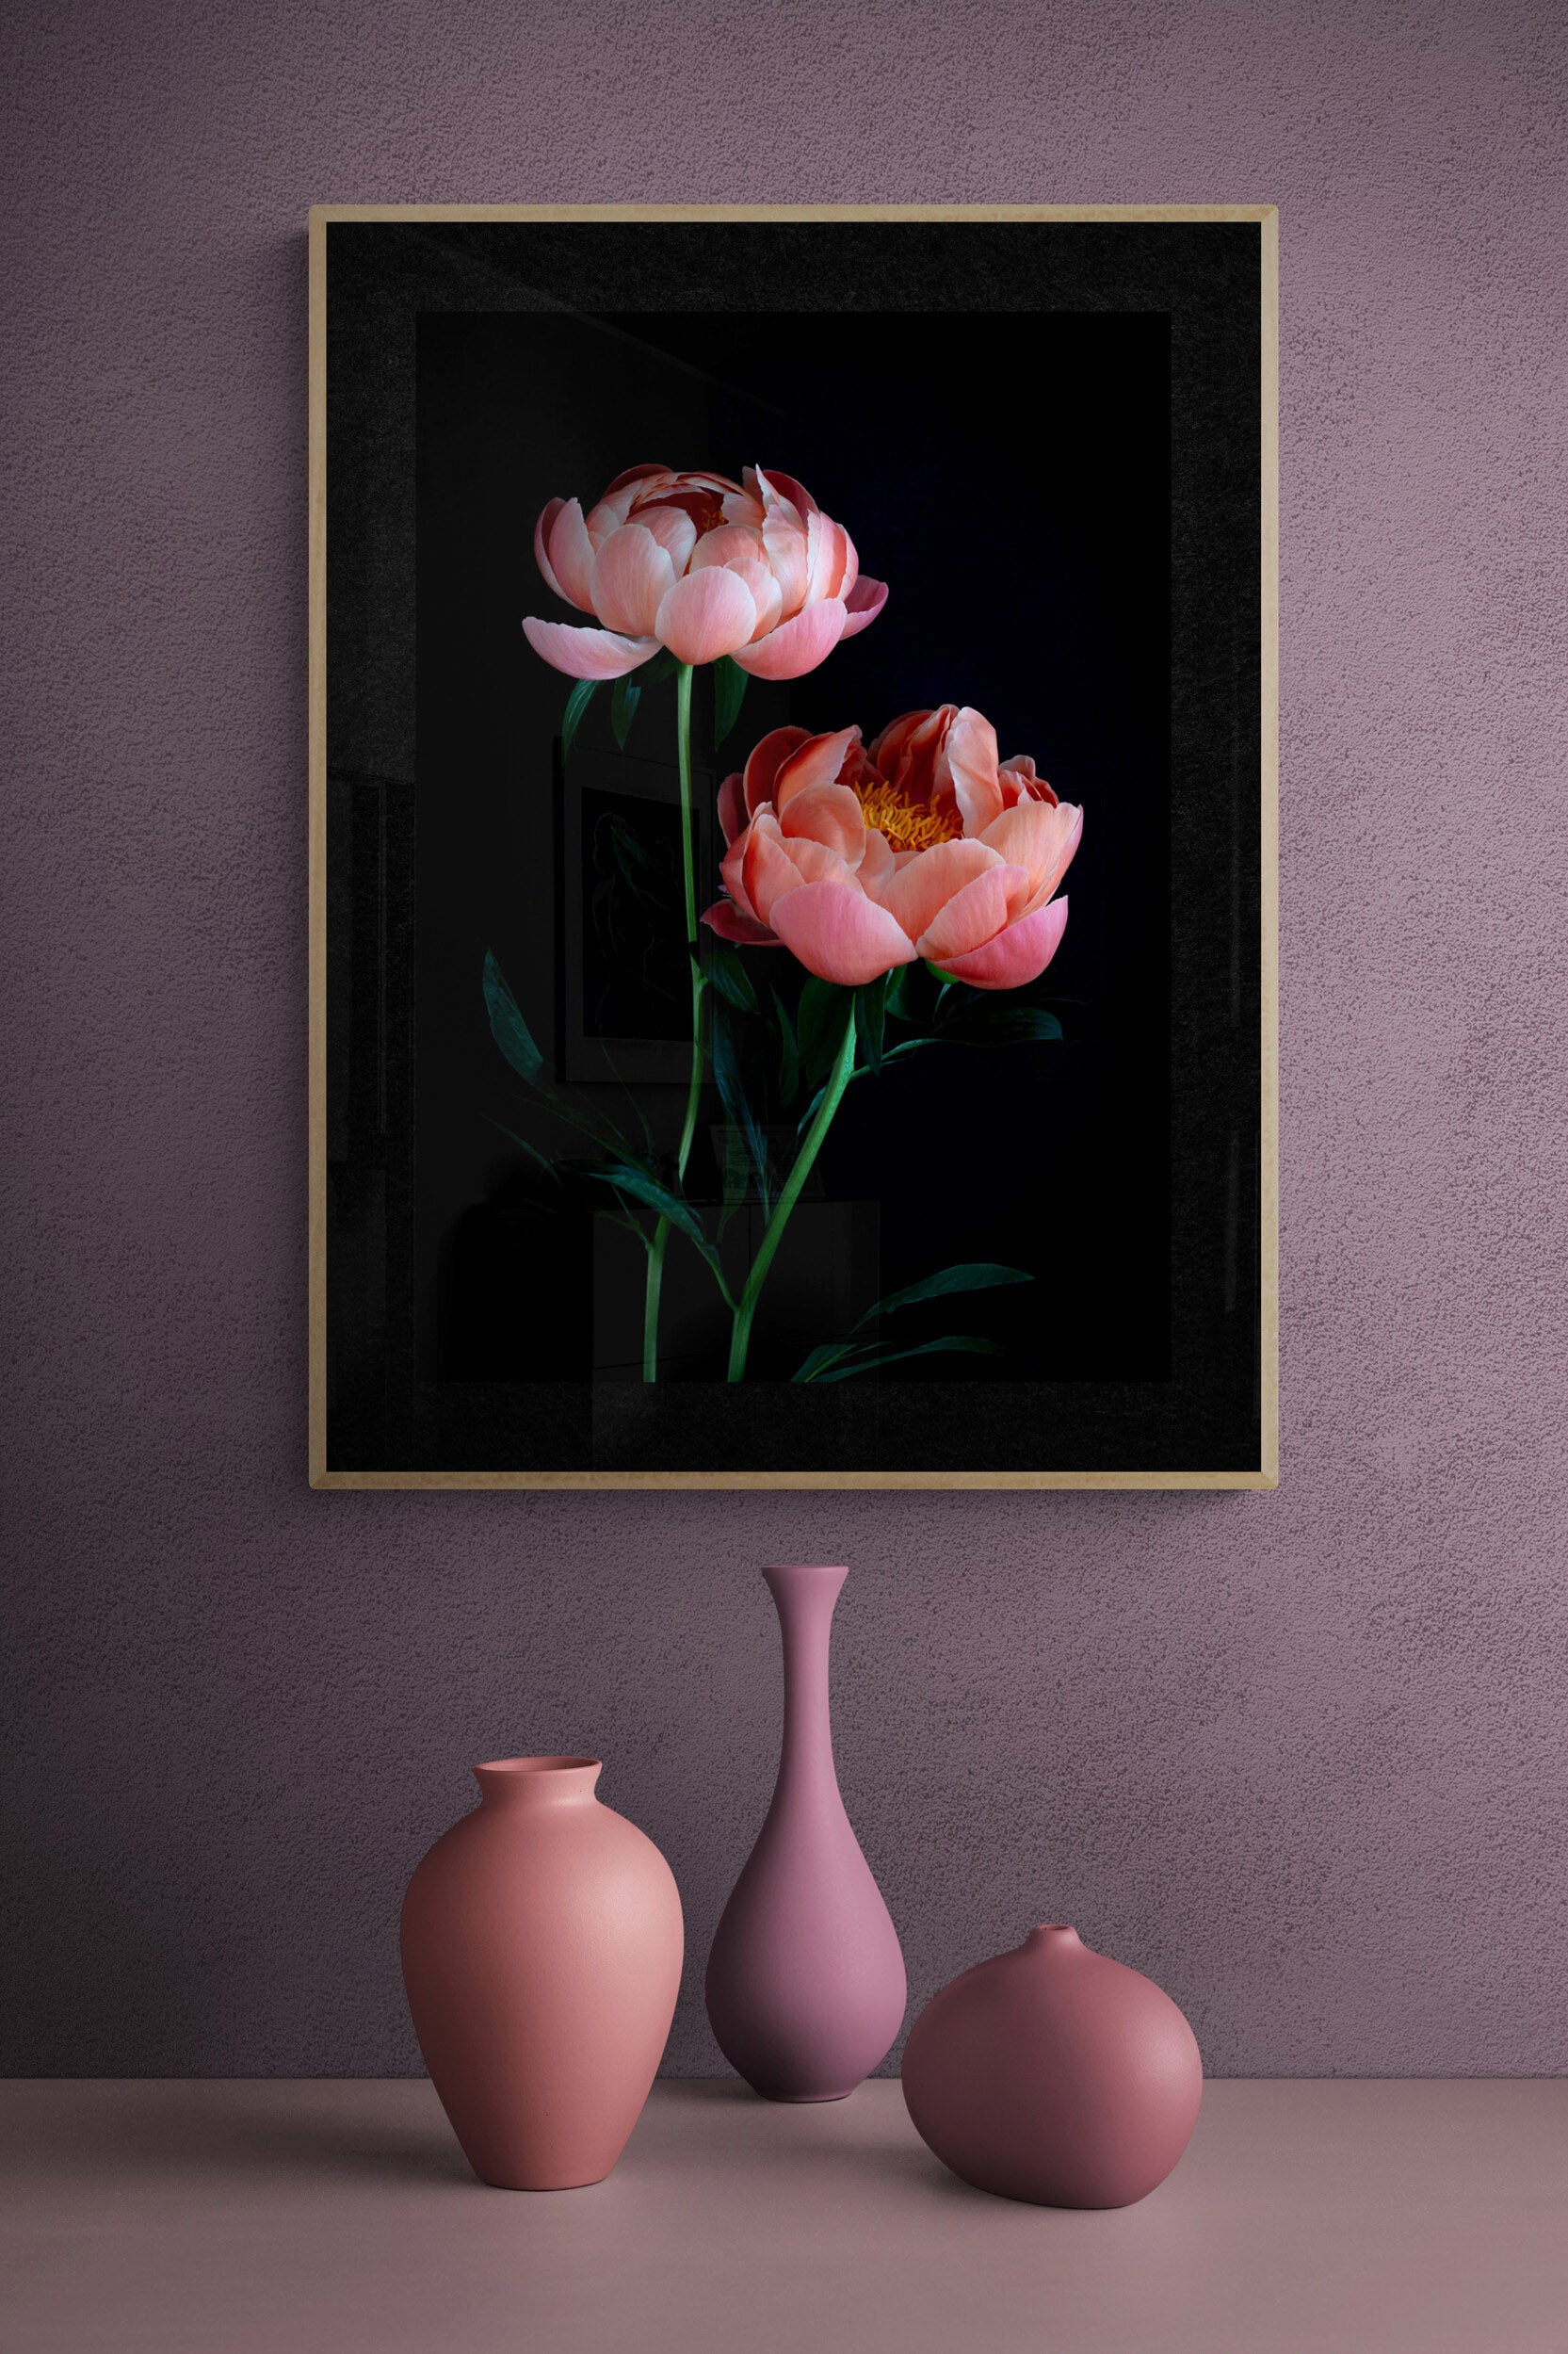 Peony ' Coral Charm' photographed on a black background, framed on a pink wall.